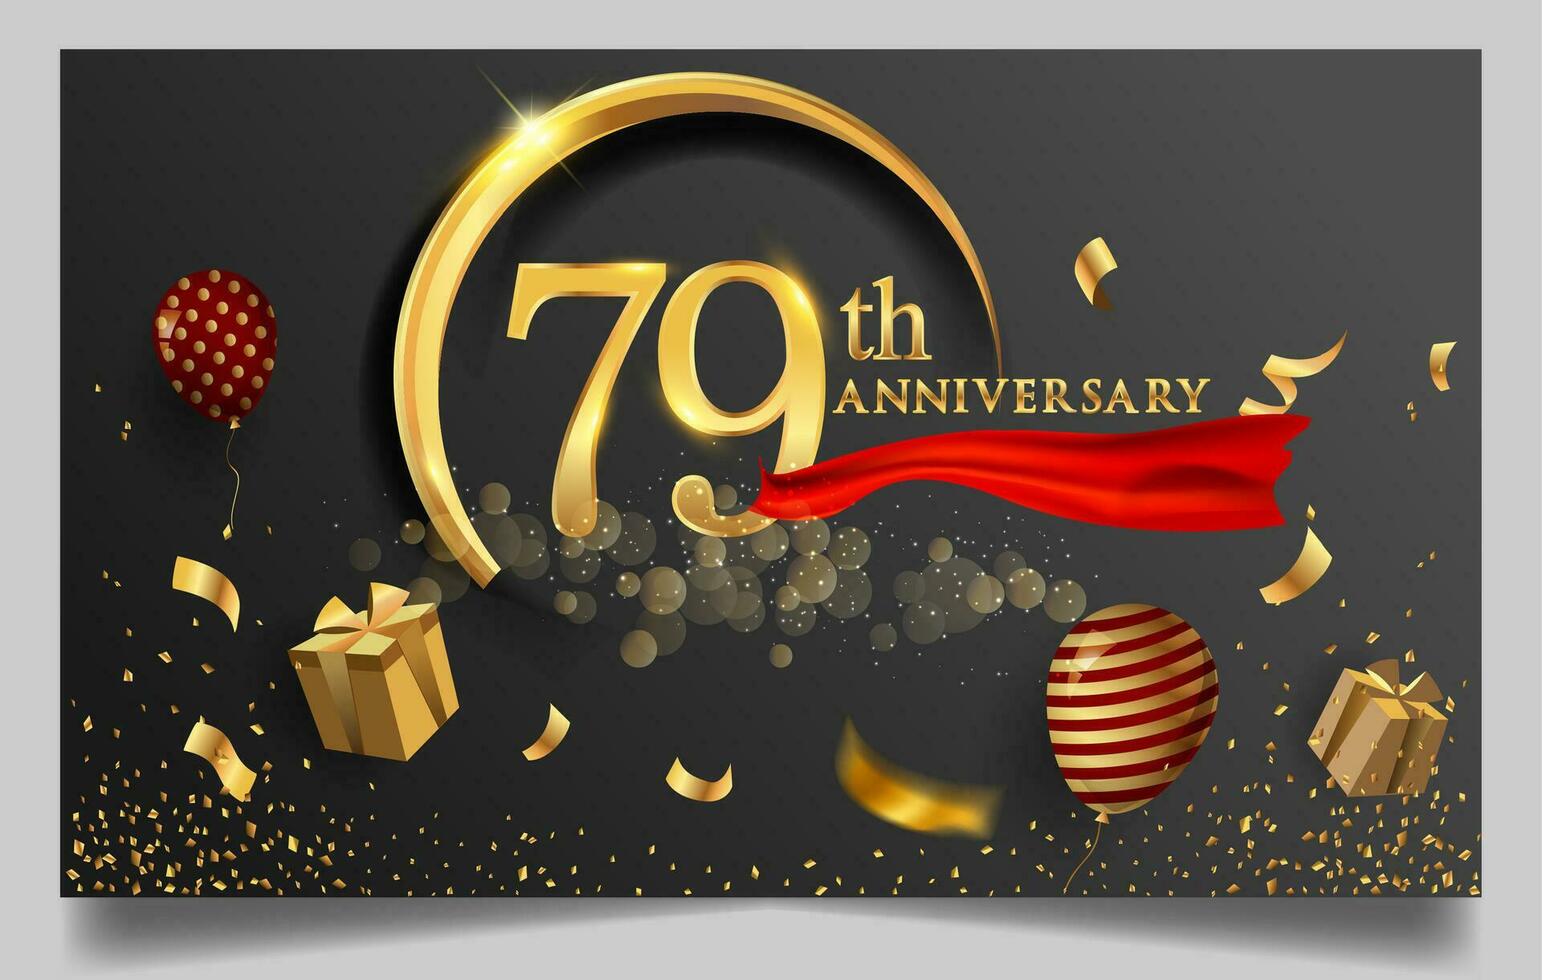 70th years anniversary design for greeting cards and invitation, with balloon, confetti and gift box, elegant design with gold and dark color, design template for birthday celebration. vector